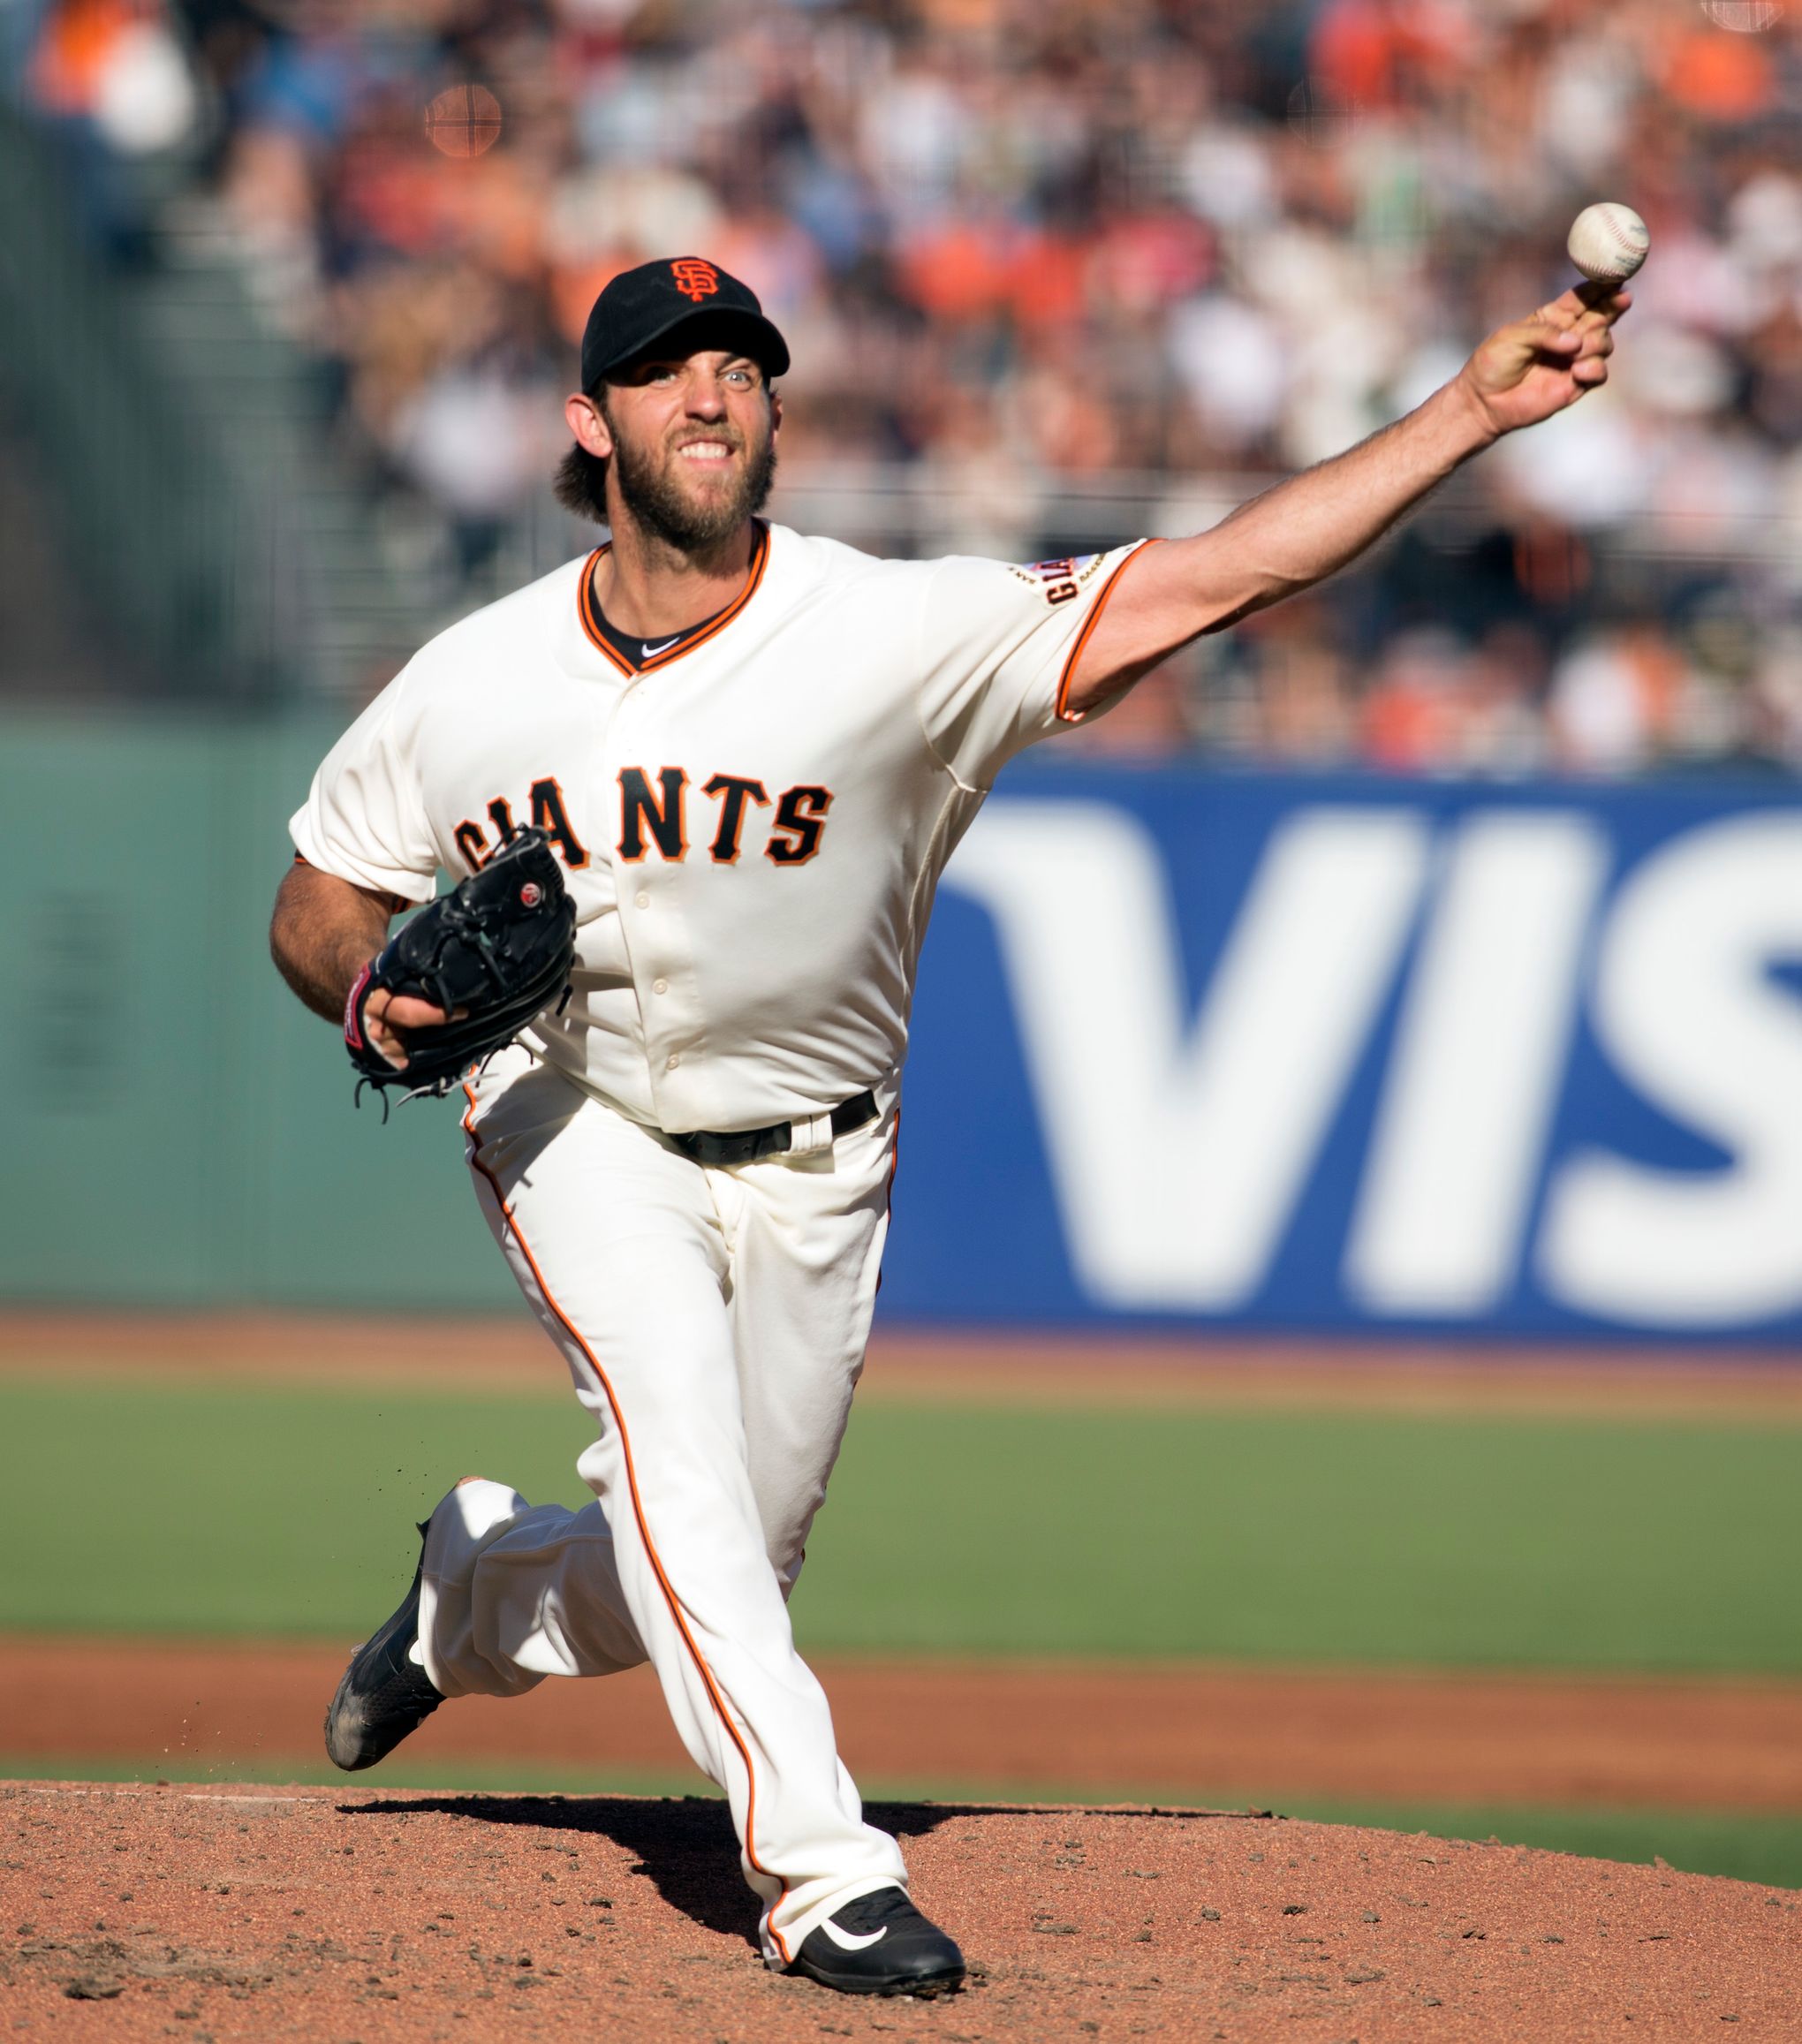 Madison Bumgarner loses cool, then game in Giants' 6-3 loss to Rangers